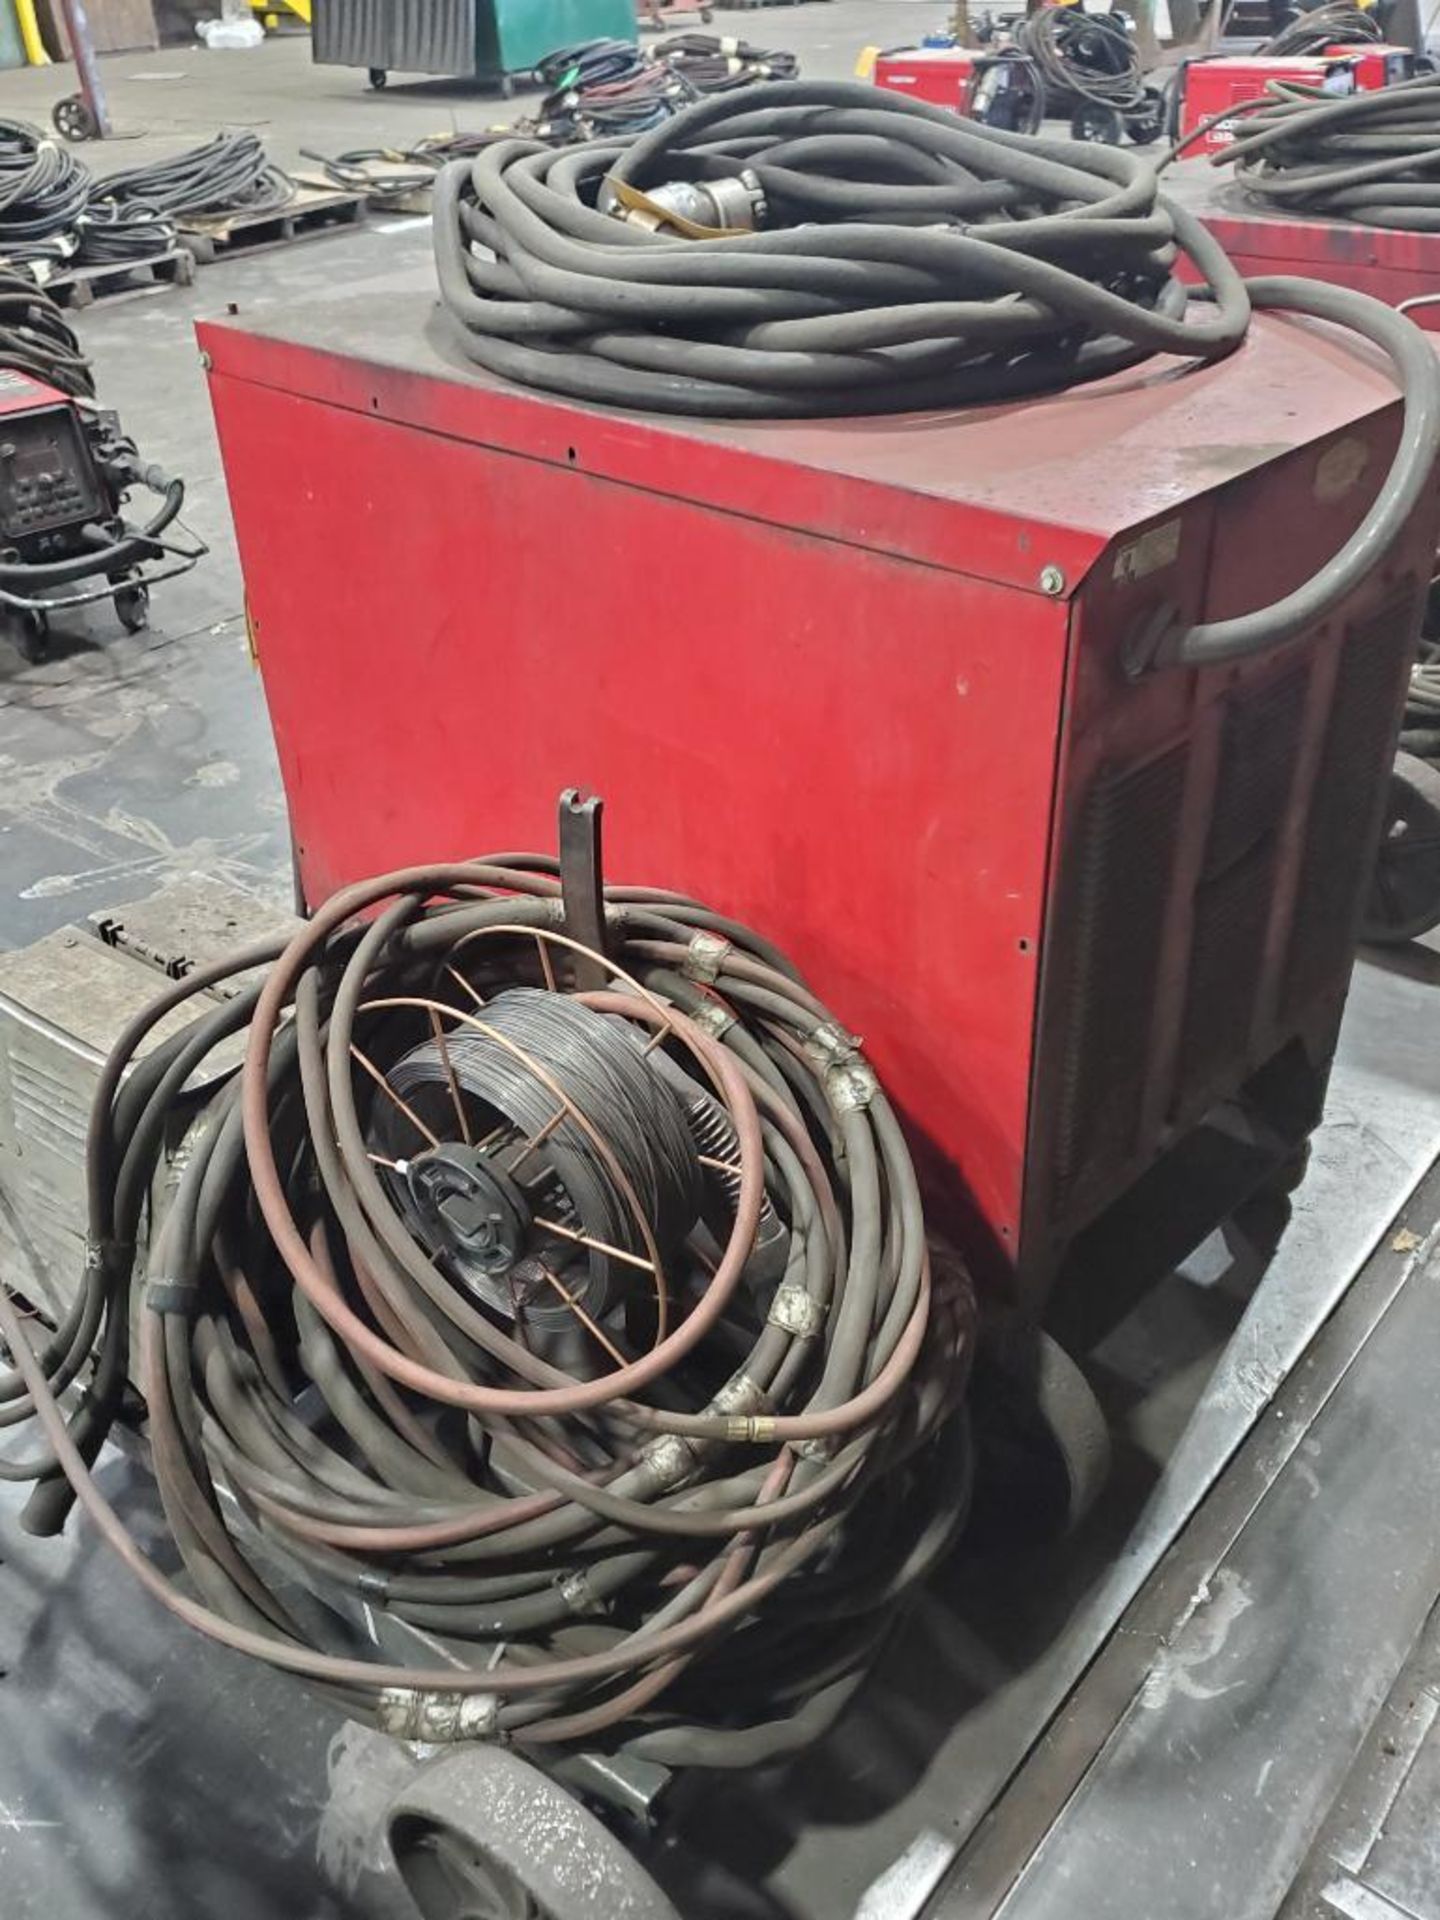 LINCOLN ELECTRIC IDEALARC DC-600 WELDER SN.AC819957 230-460V WITH LN-8 WIRE FEED SN.110270 115V - Image 3 of 6